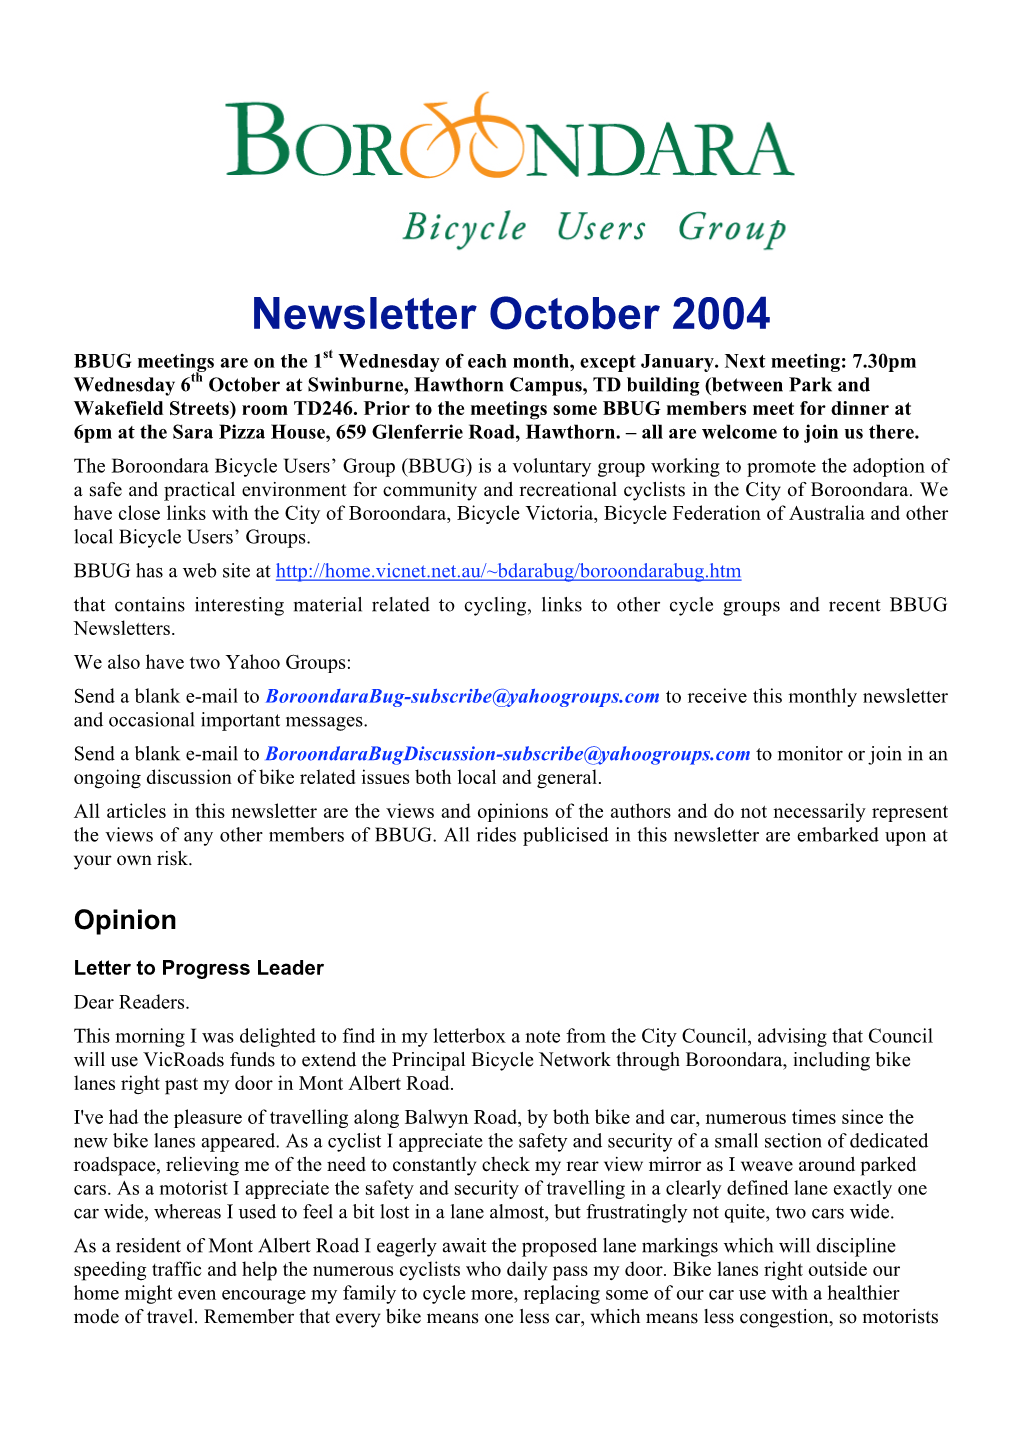 Newsletter October 2004 BBUG Meetings Are on the 1St Wednesday of Each Month, Except January